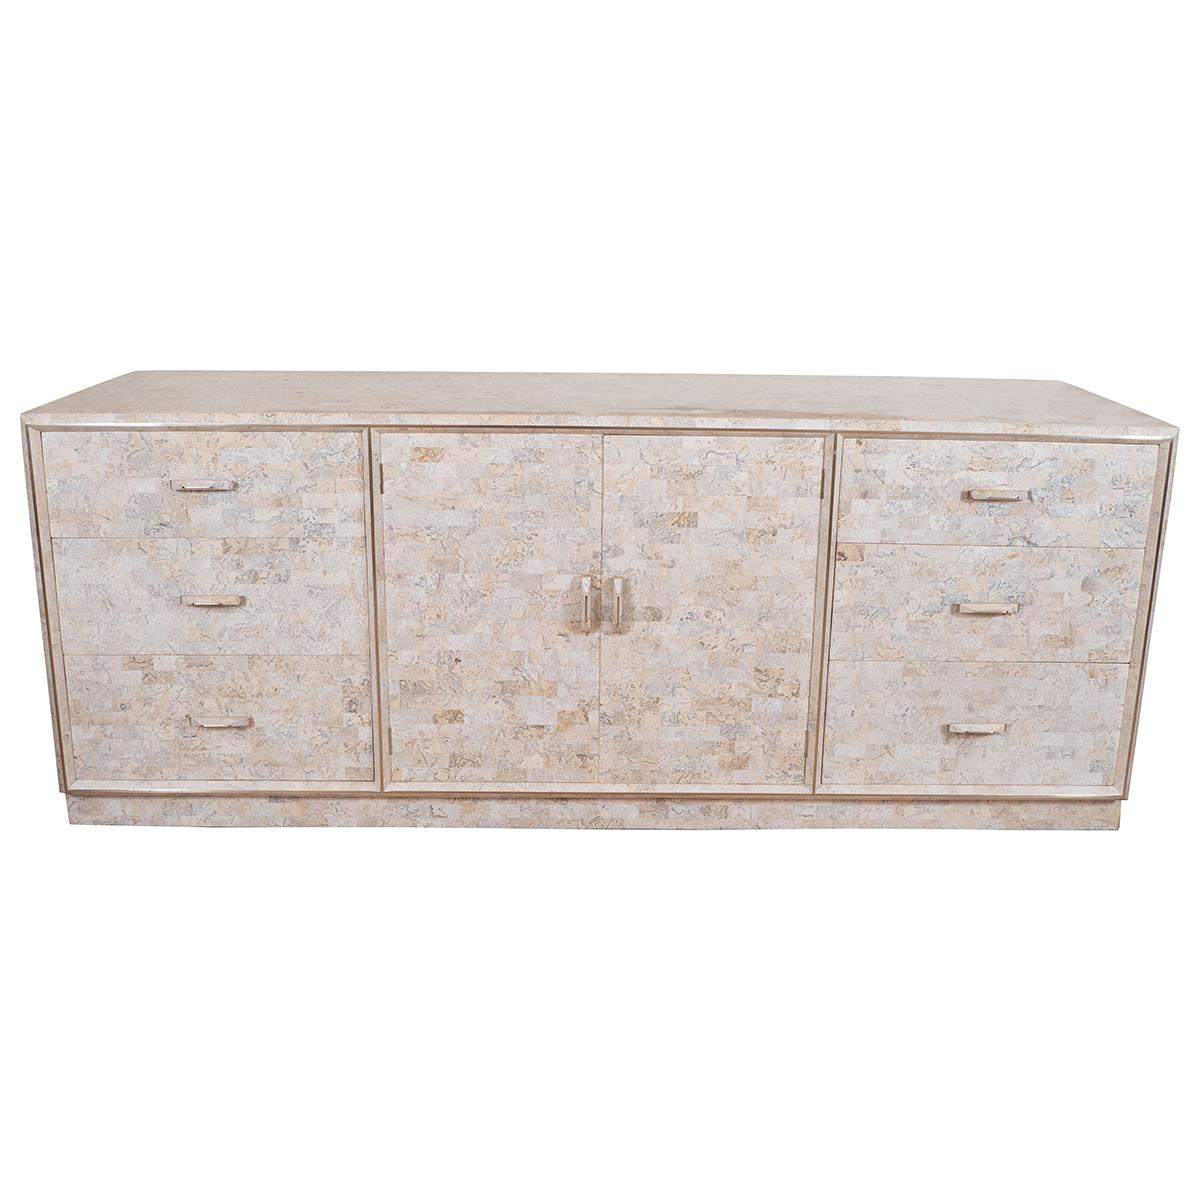 Tessellated stone and brass sideboard.